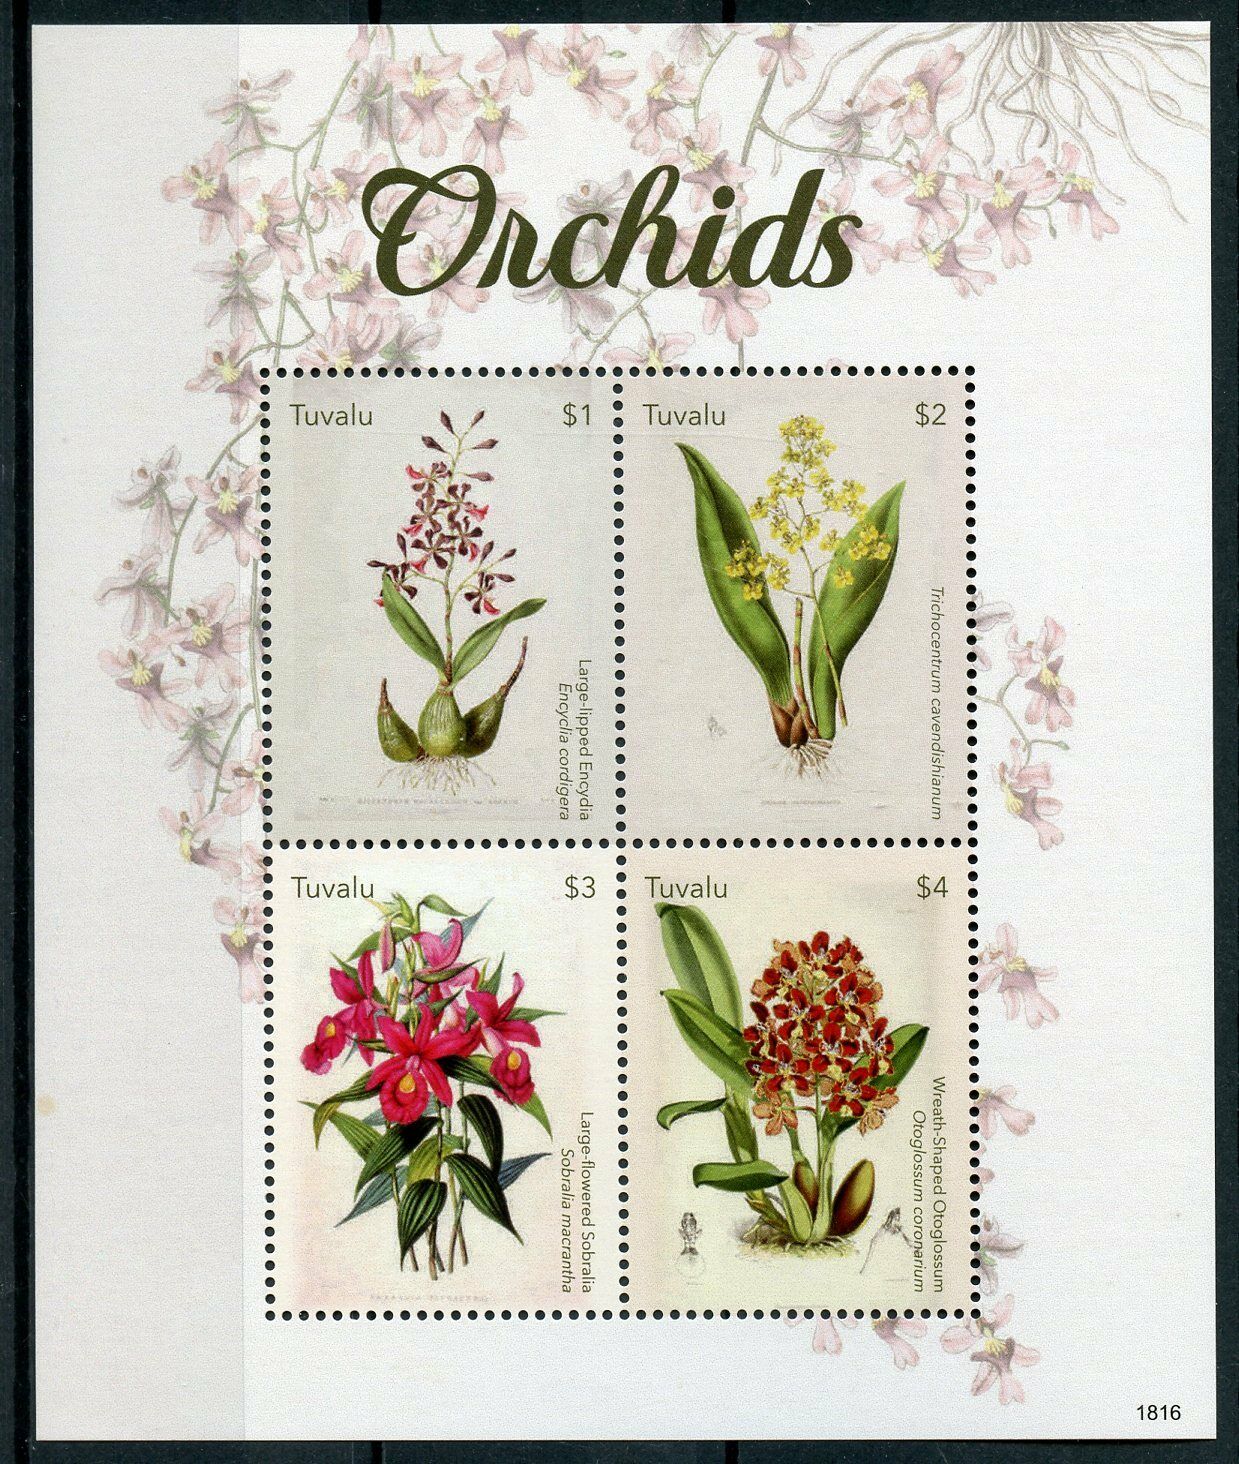 Tuvalu Flowers Stamps 2018 MNH Orchids Encydia Sobralia Orchid Nature 2v S/S